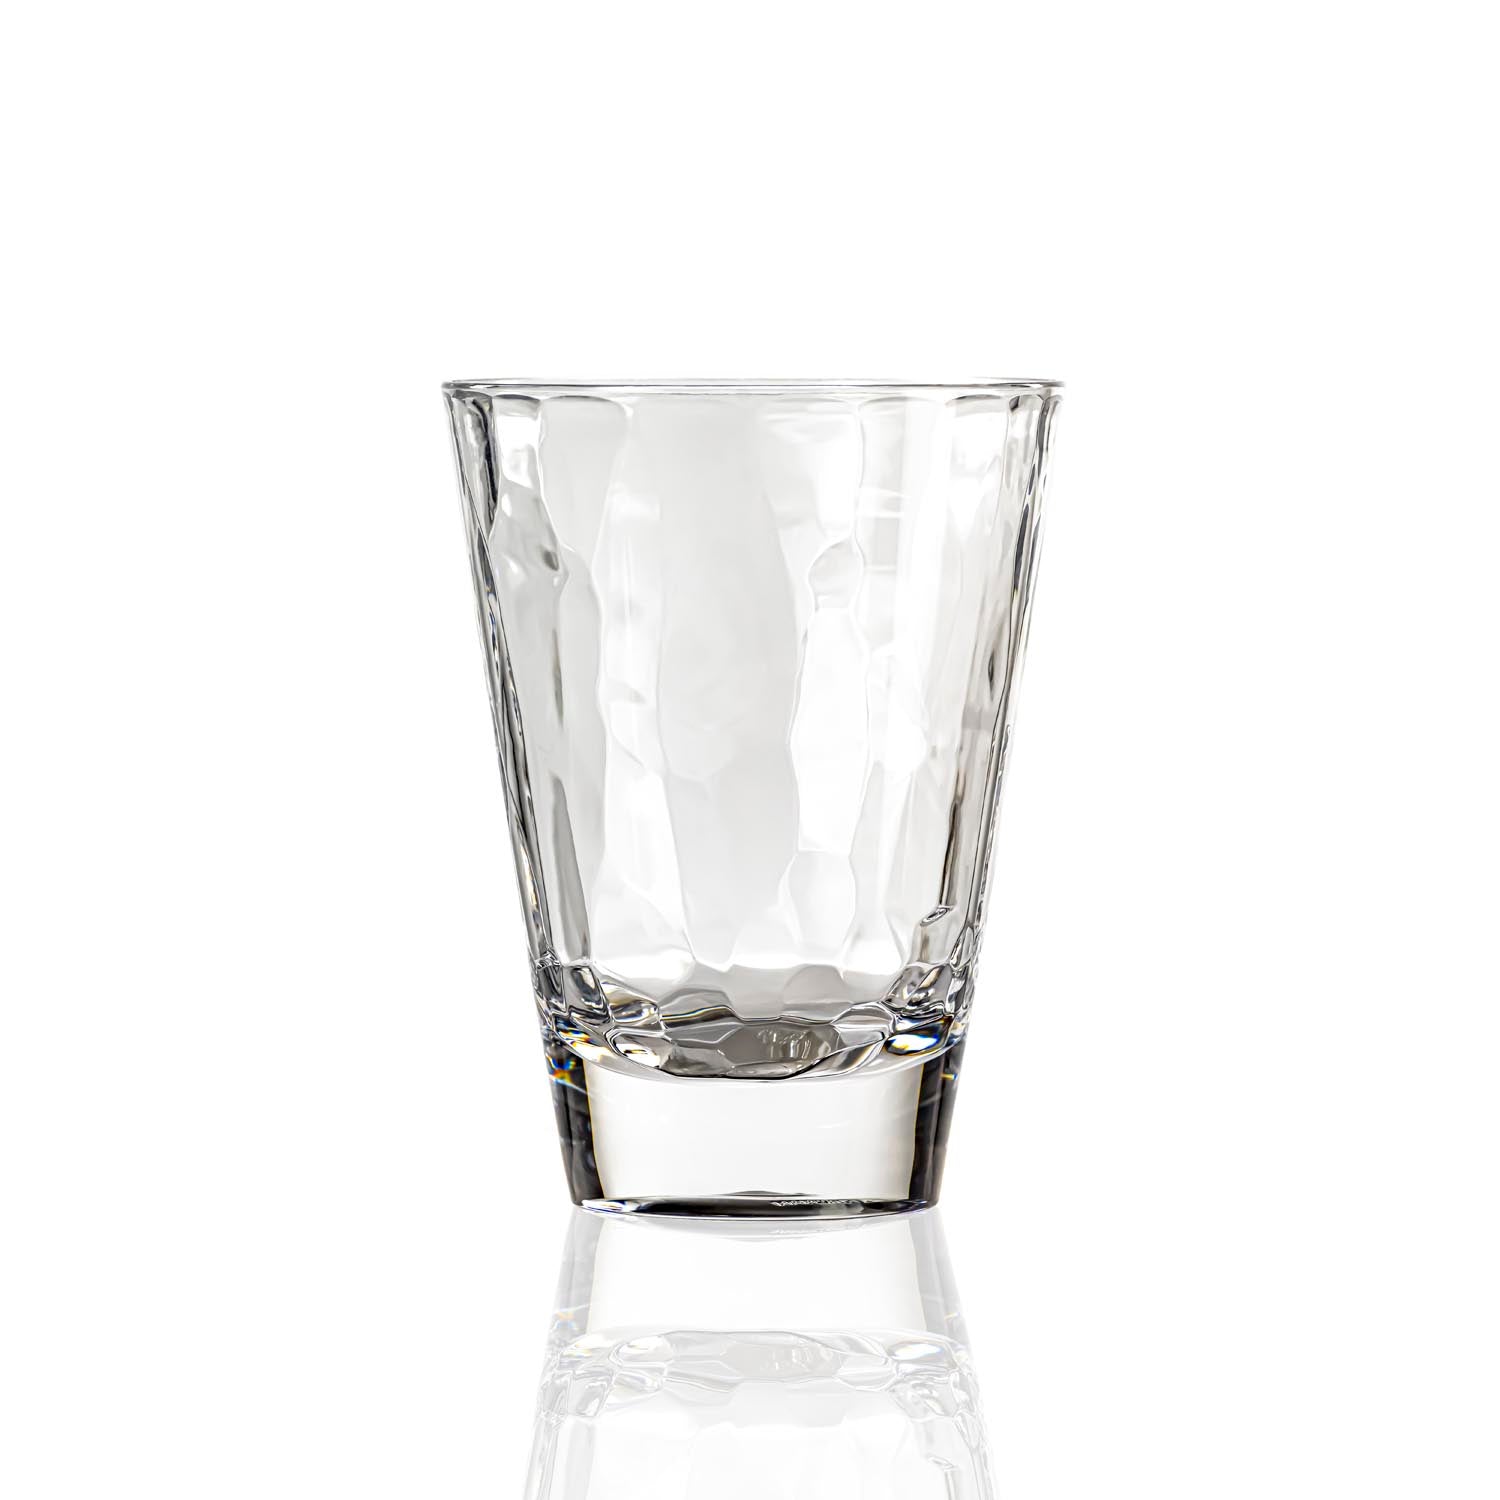 14-ounce clear acrylic tumbler glass from the Merritt Designs Cascade collection. Front view on white background